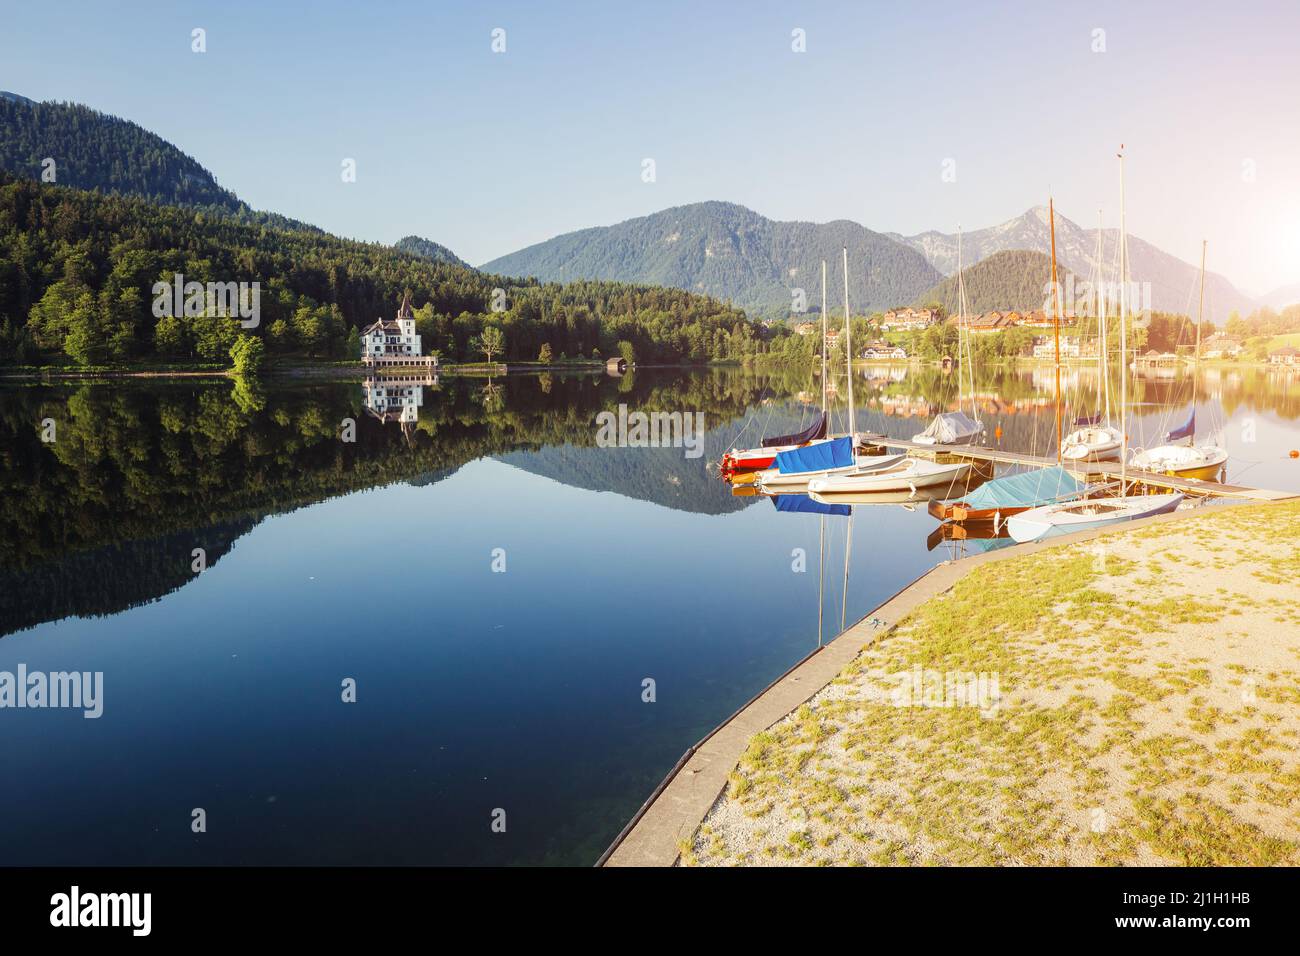 Fantastic views of the morning lake glowing by sunlight. Dramatic and picturesque scene. Location: resort Grundlsee, Liezen District of Styria, Austri Stock Photo